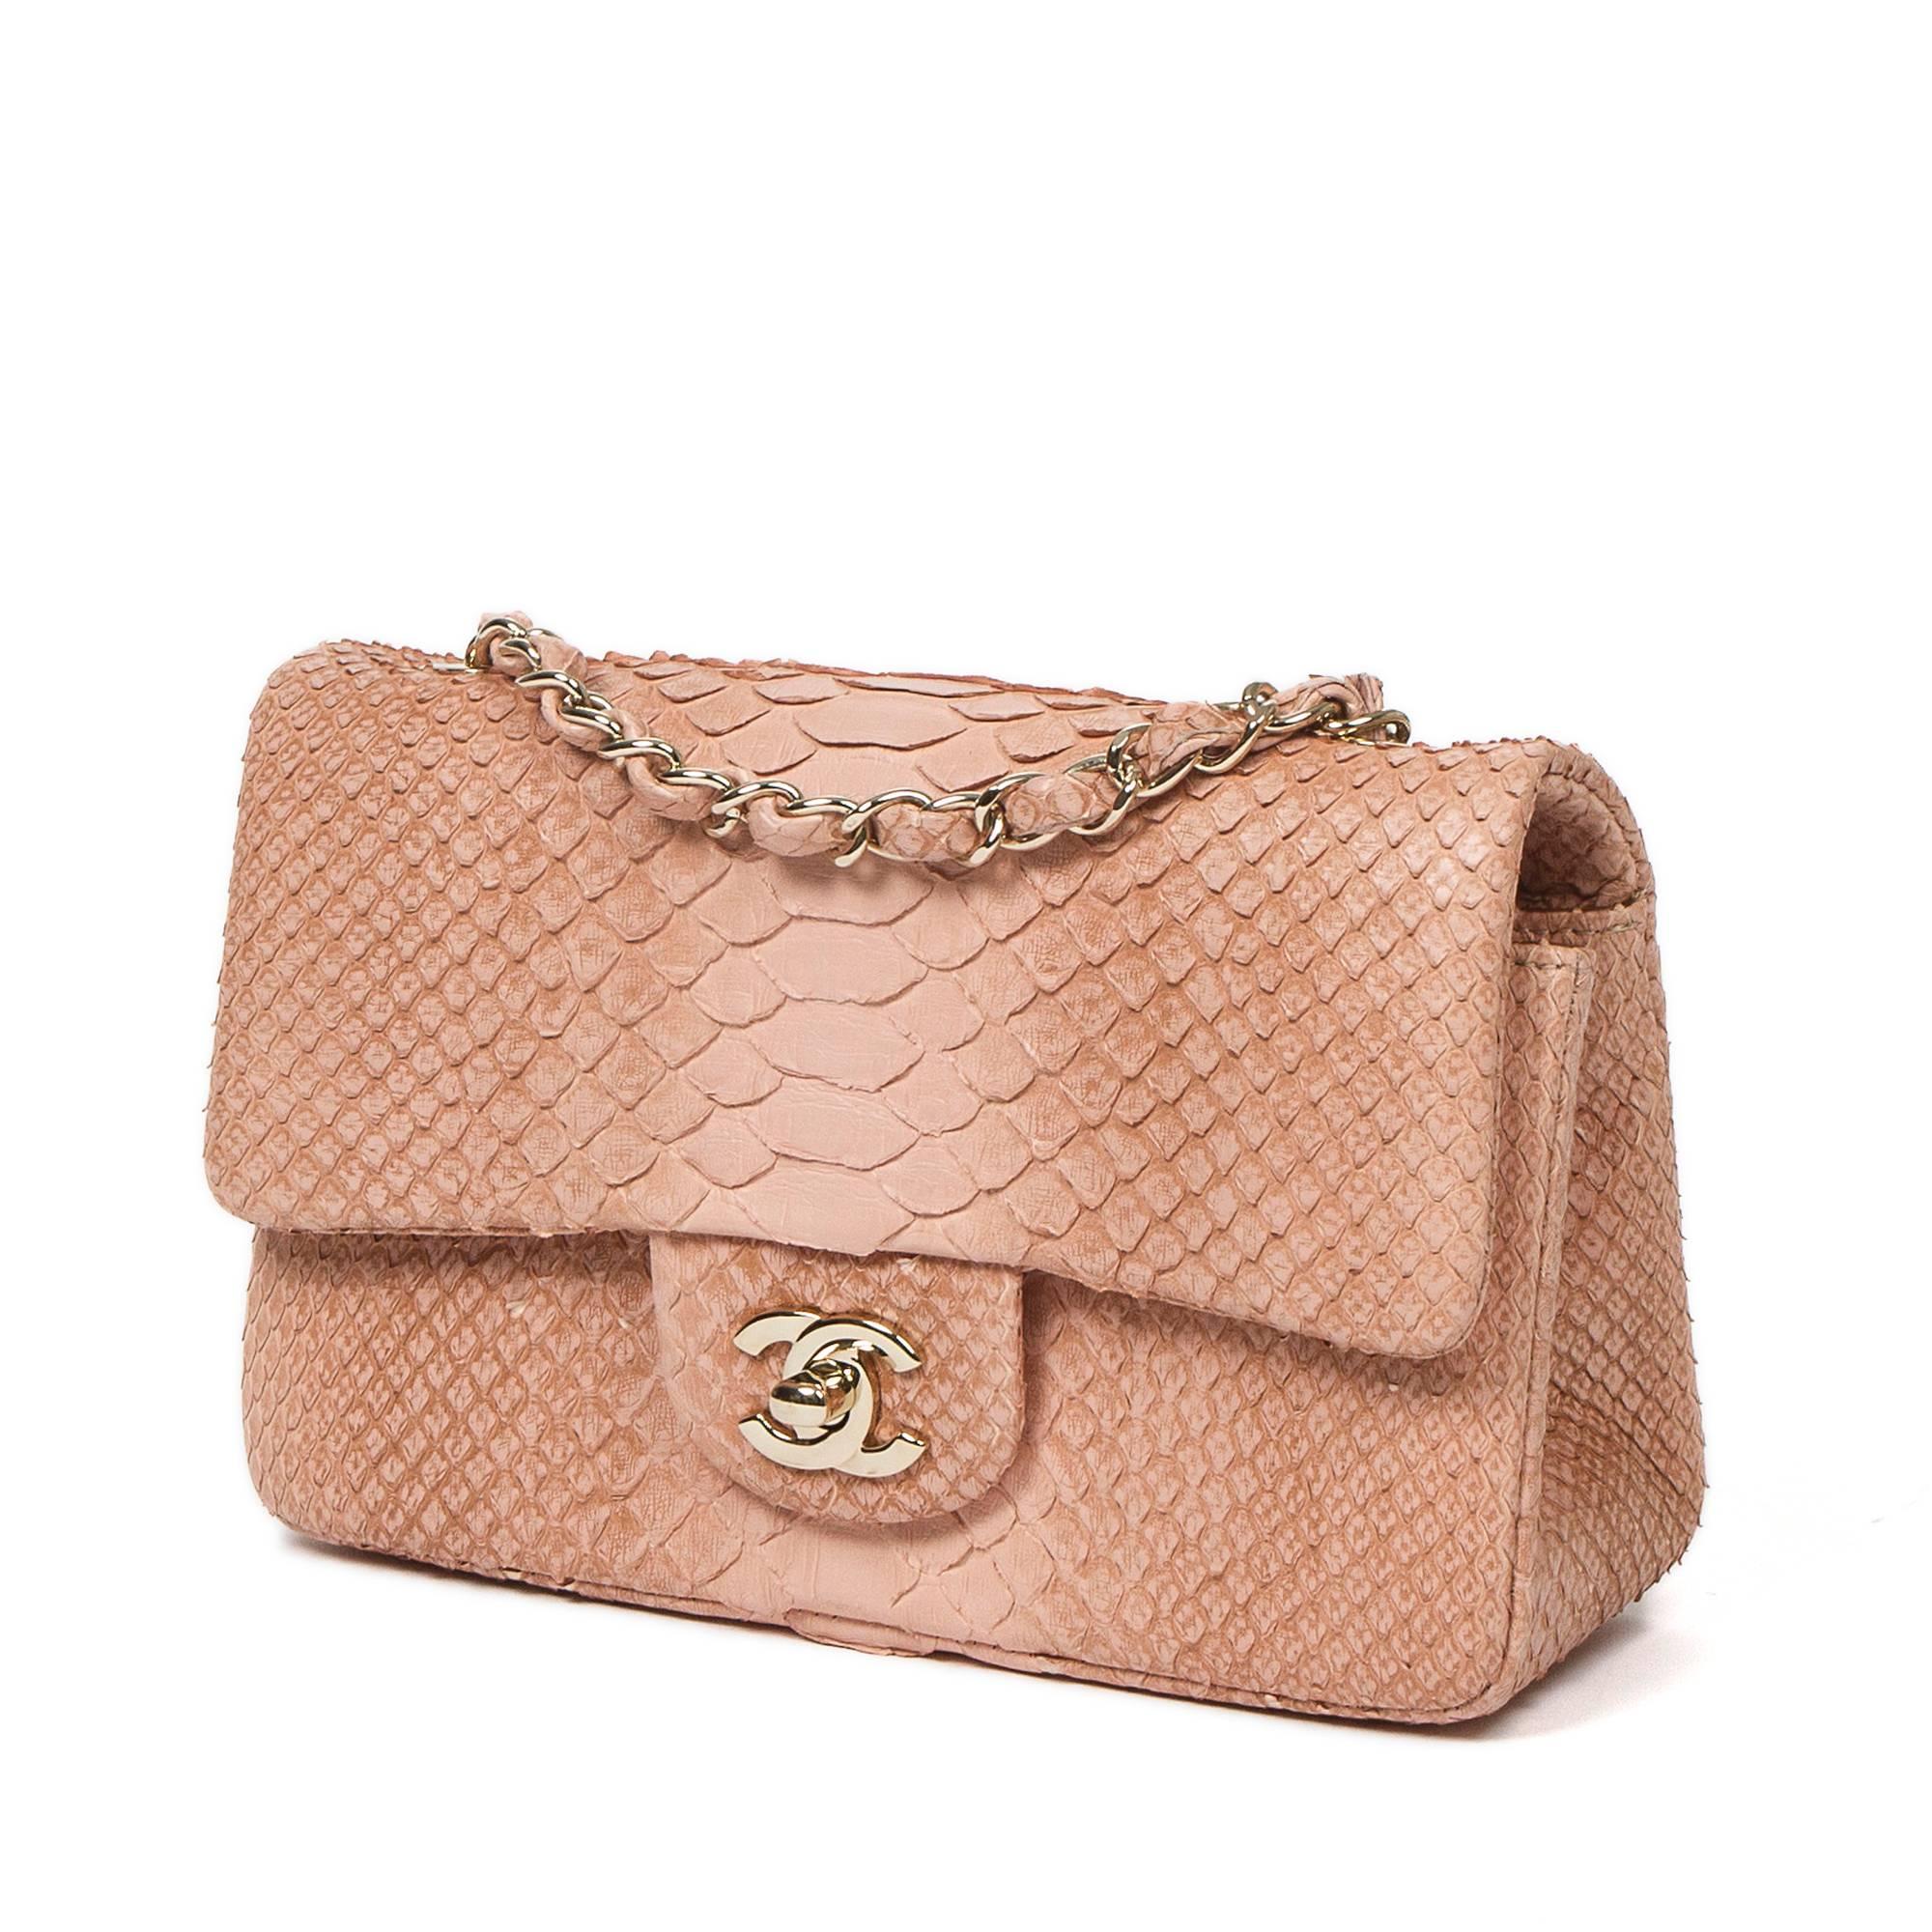 Mini Flap Bag in soft pink python skin, long chain strap interlaced with python skin and signature CC turlock, champaign gold hardware. Back slip pocket. Tan leather lined interior with one slip pocket and zip pocket. Metal plaque signed 